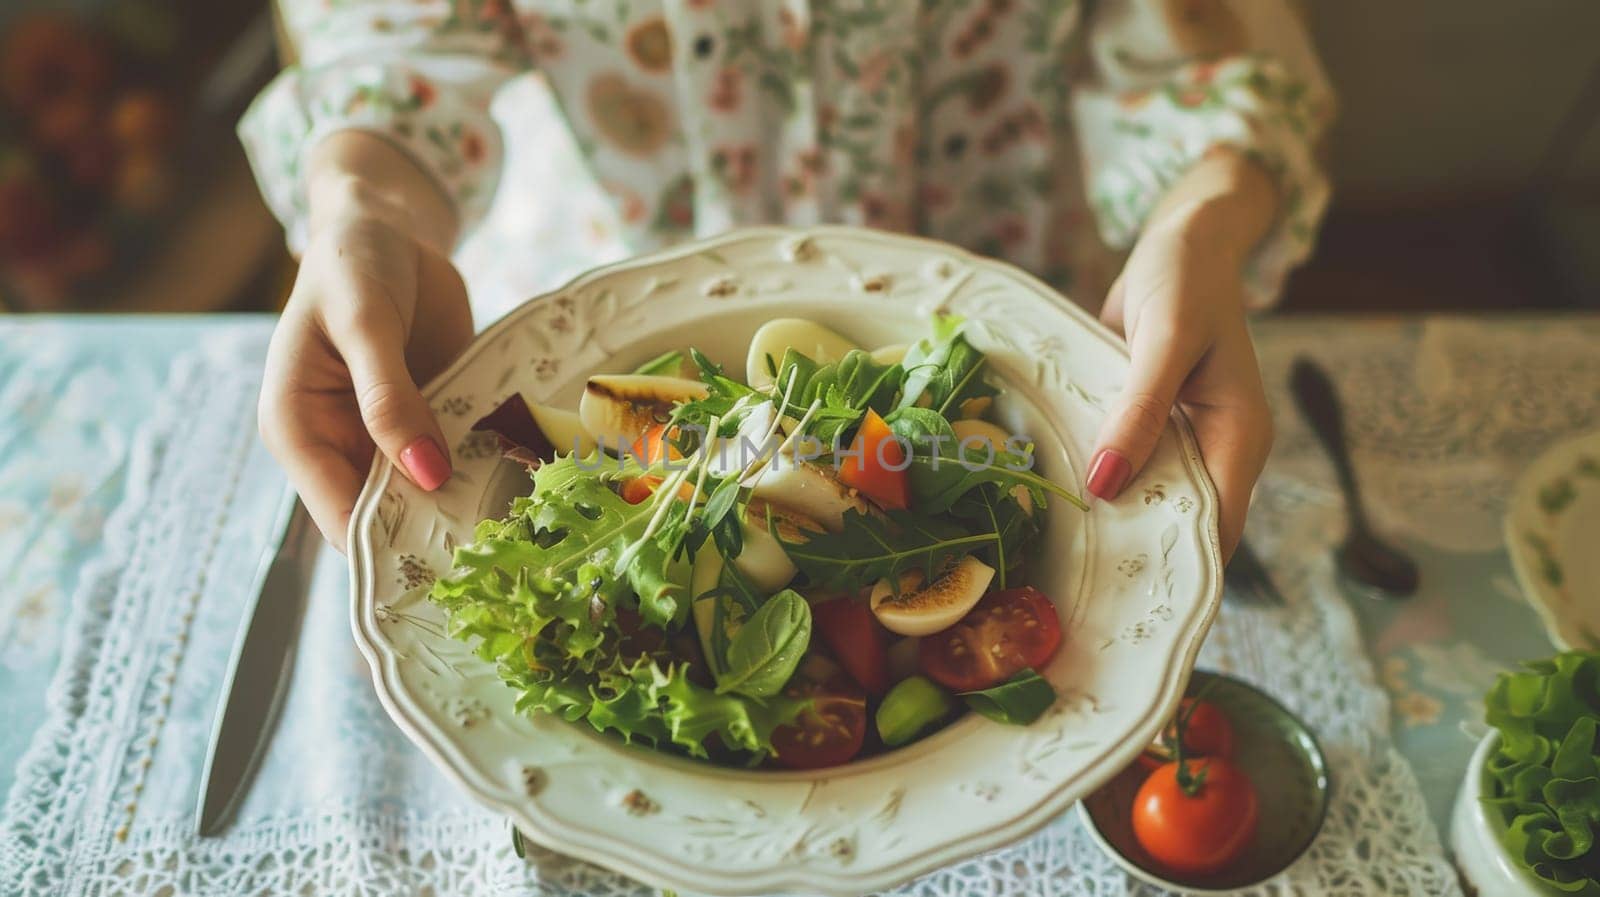 Woman's hands holding a bowl of vegetable salad, Hands with healthy eating theme.